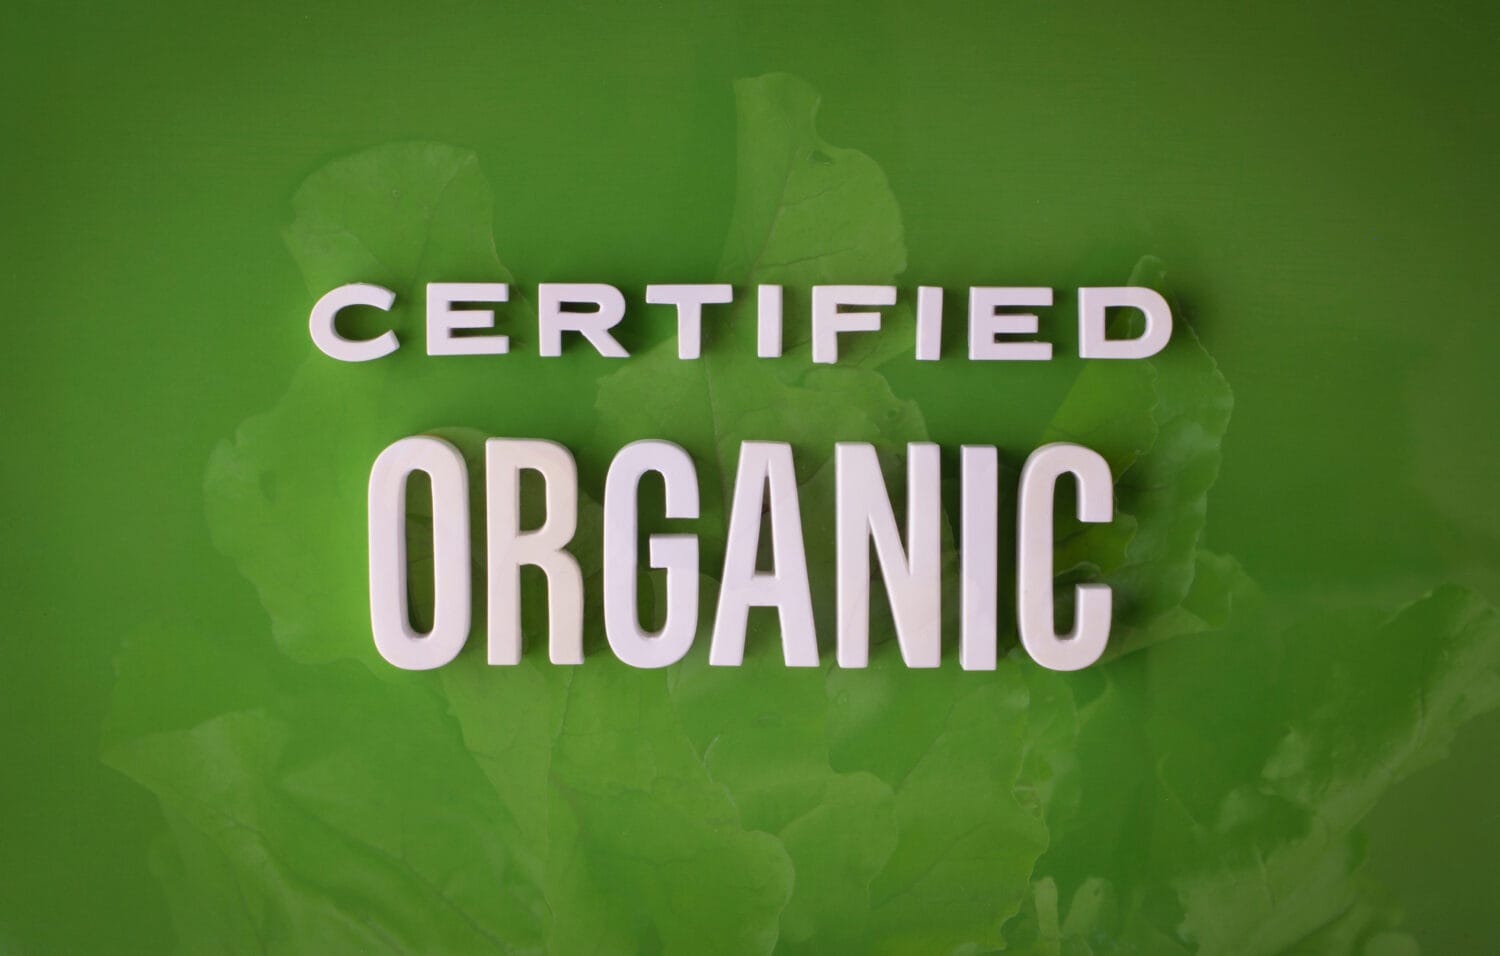 Certified organic lettering sign made with colorful background and white ceramic letters.